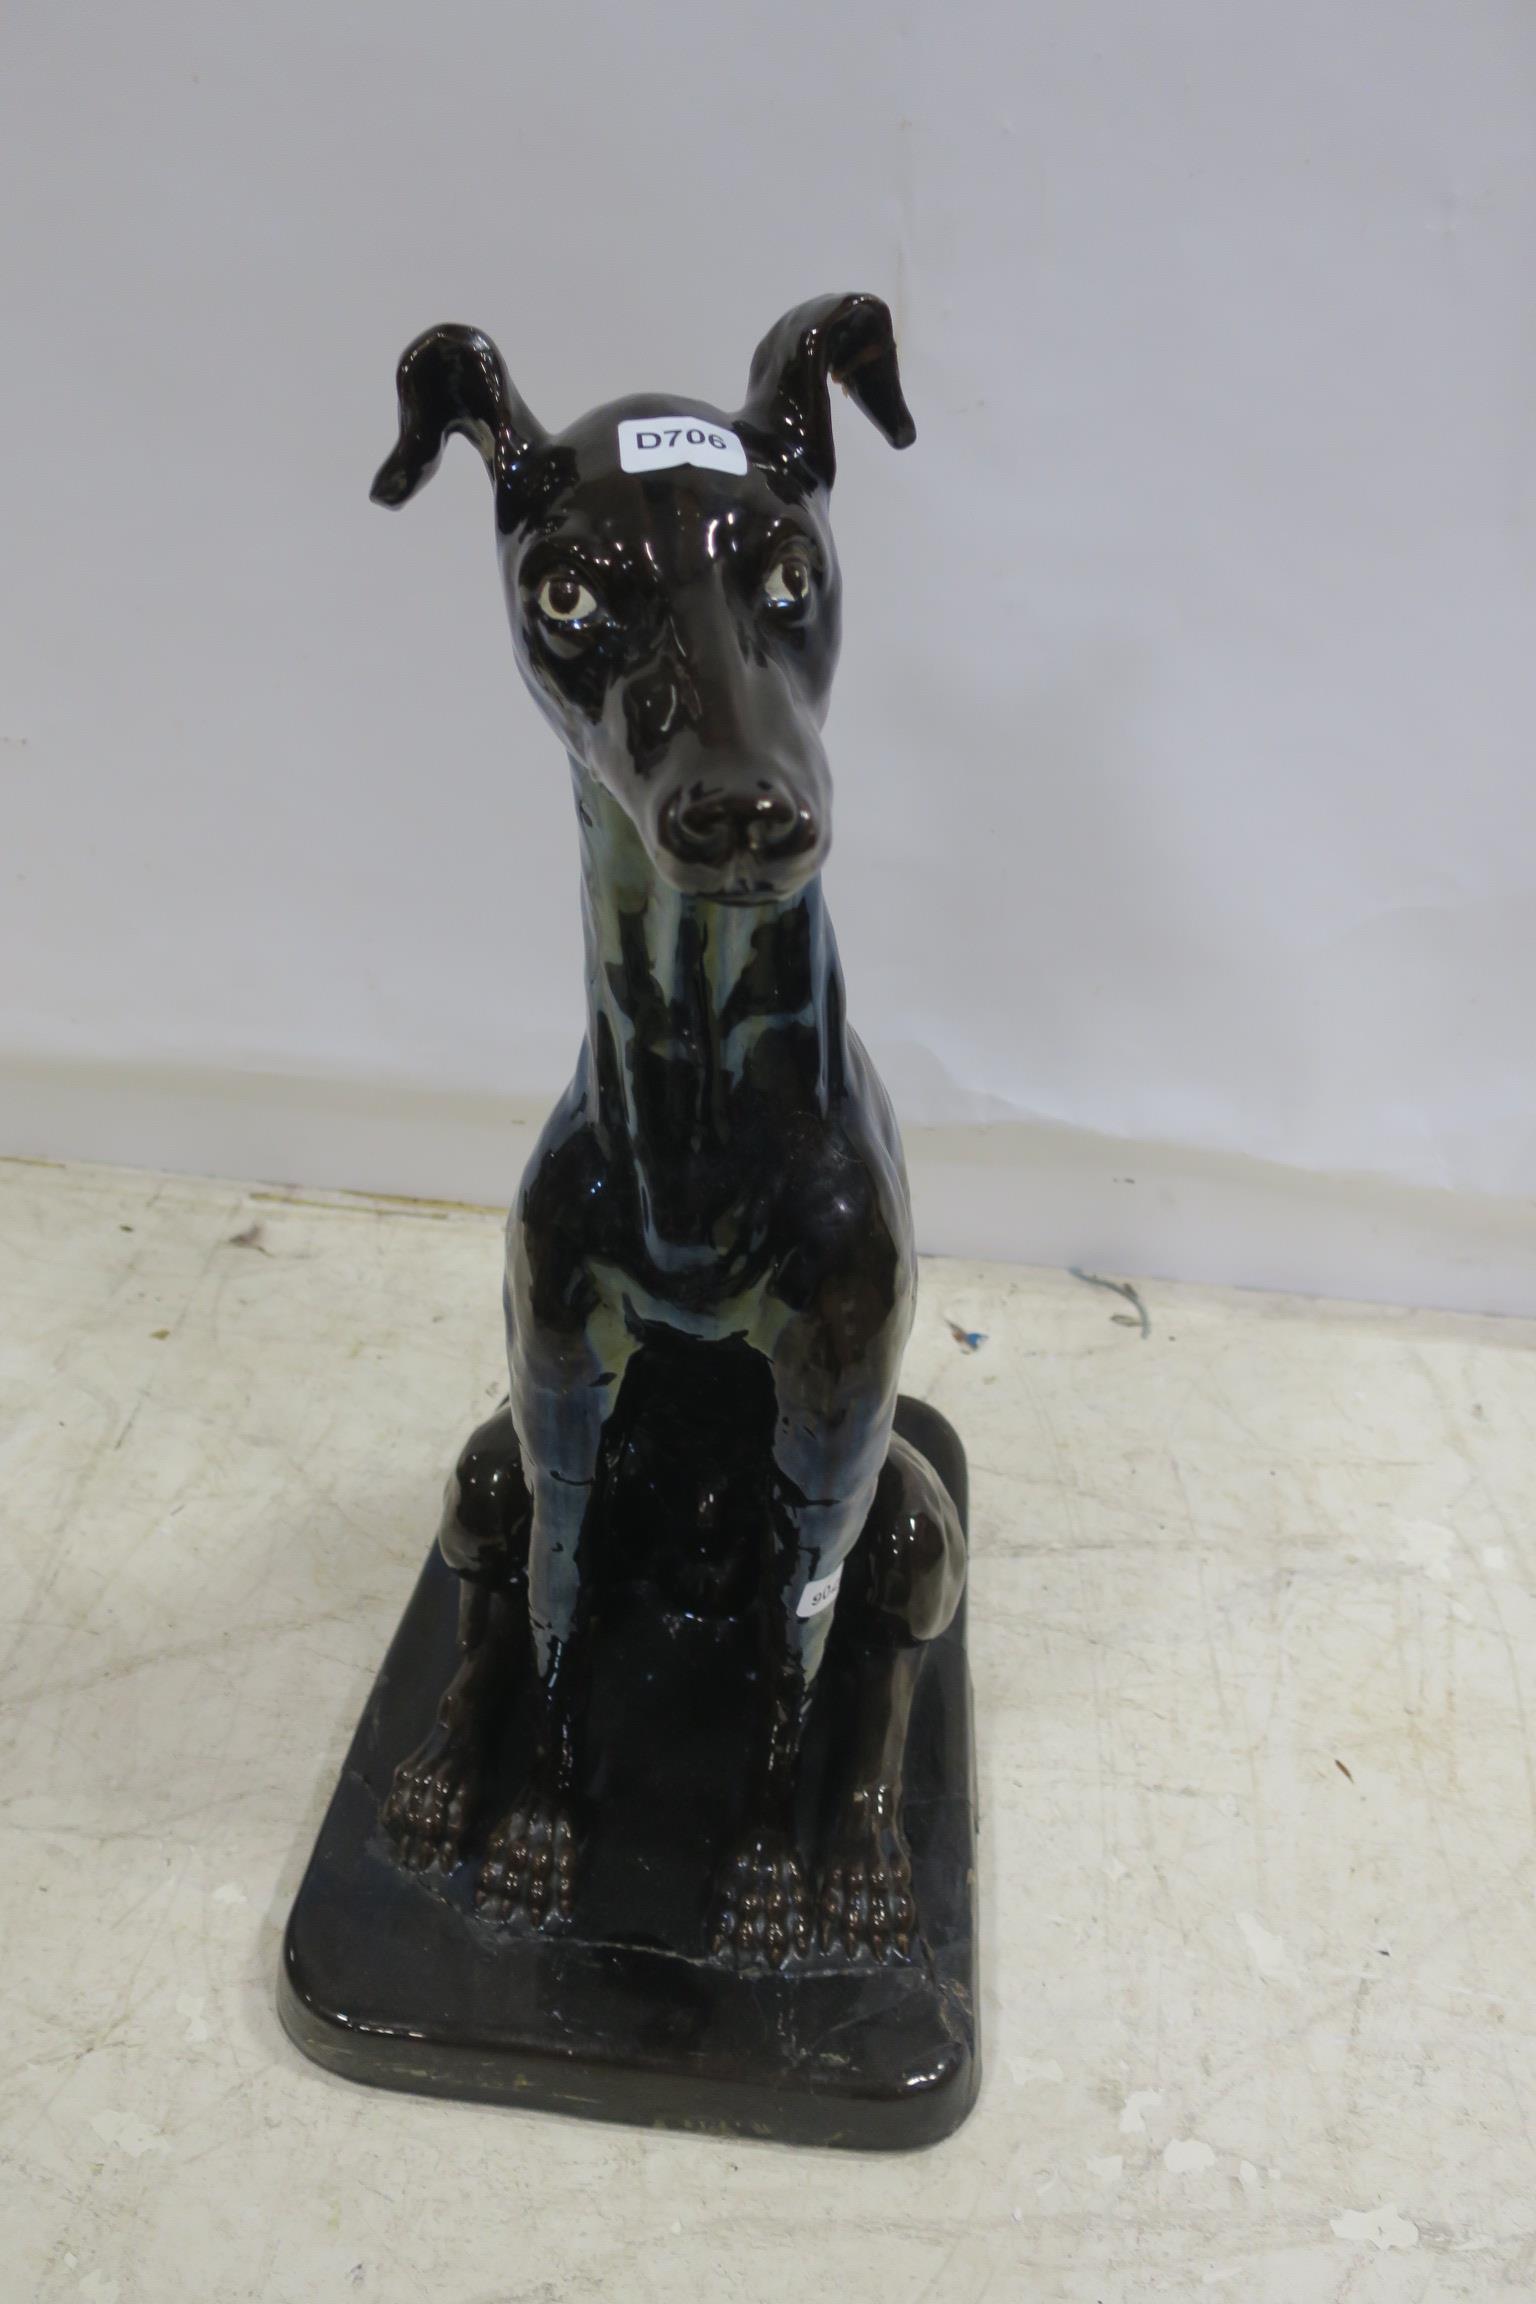 A GLAZED CHINA FIGURE modelled as a hound shown seated on rectangular base 82cm (h) x 36cm (w) x